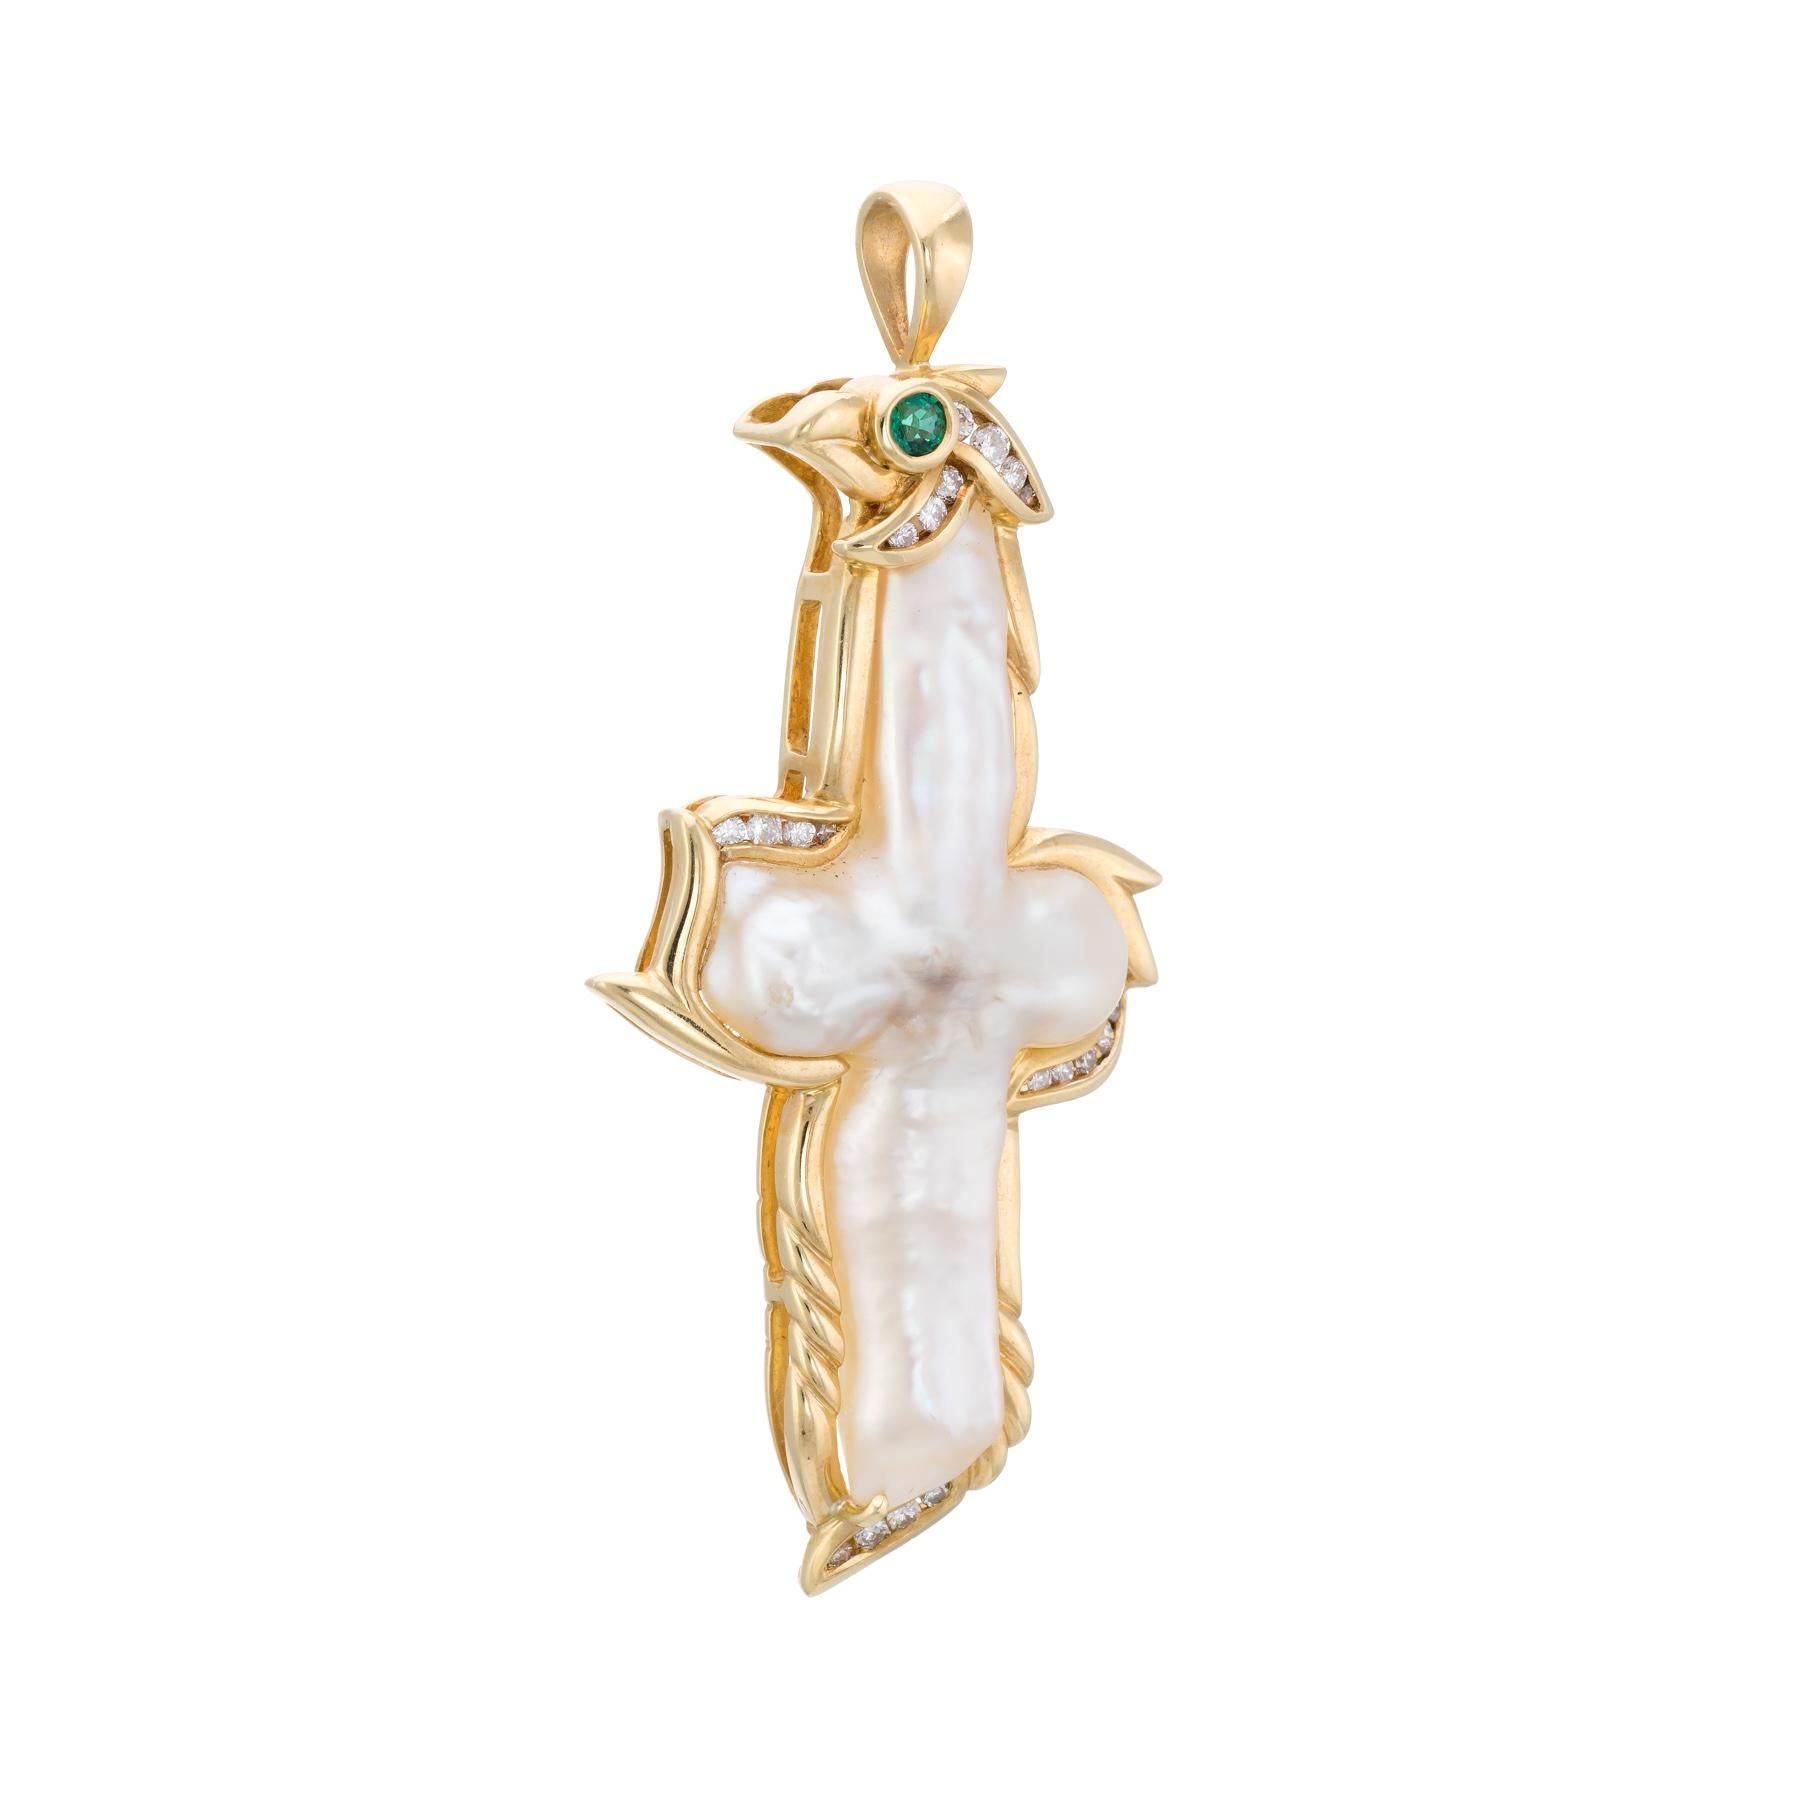 Finely detailed religious cross pendant, crafted in 18 karat yellow  gold.  

A large Biwa pearl measures 41mm x 20mm, accented with an estimated 0.33 carats of diamonds (estimated at G-H color and VS2-SI1 clarity). The emerald is estimated at 0.05